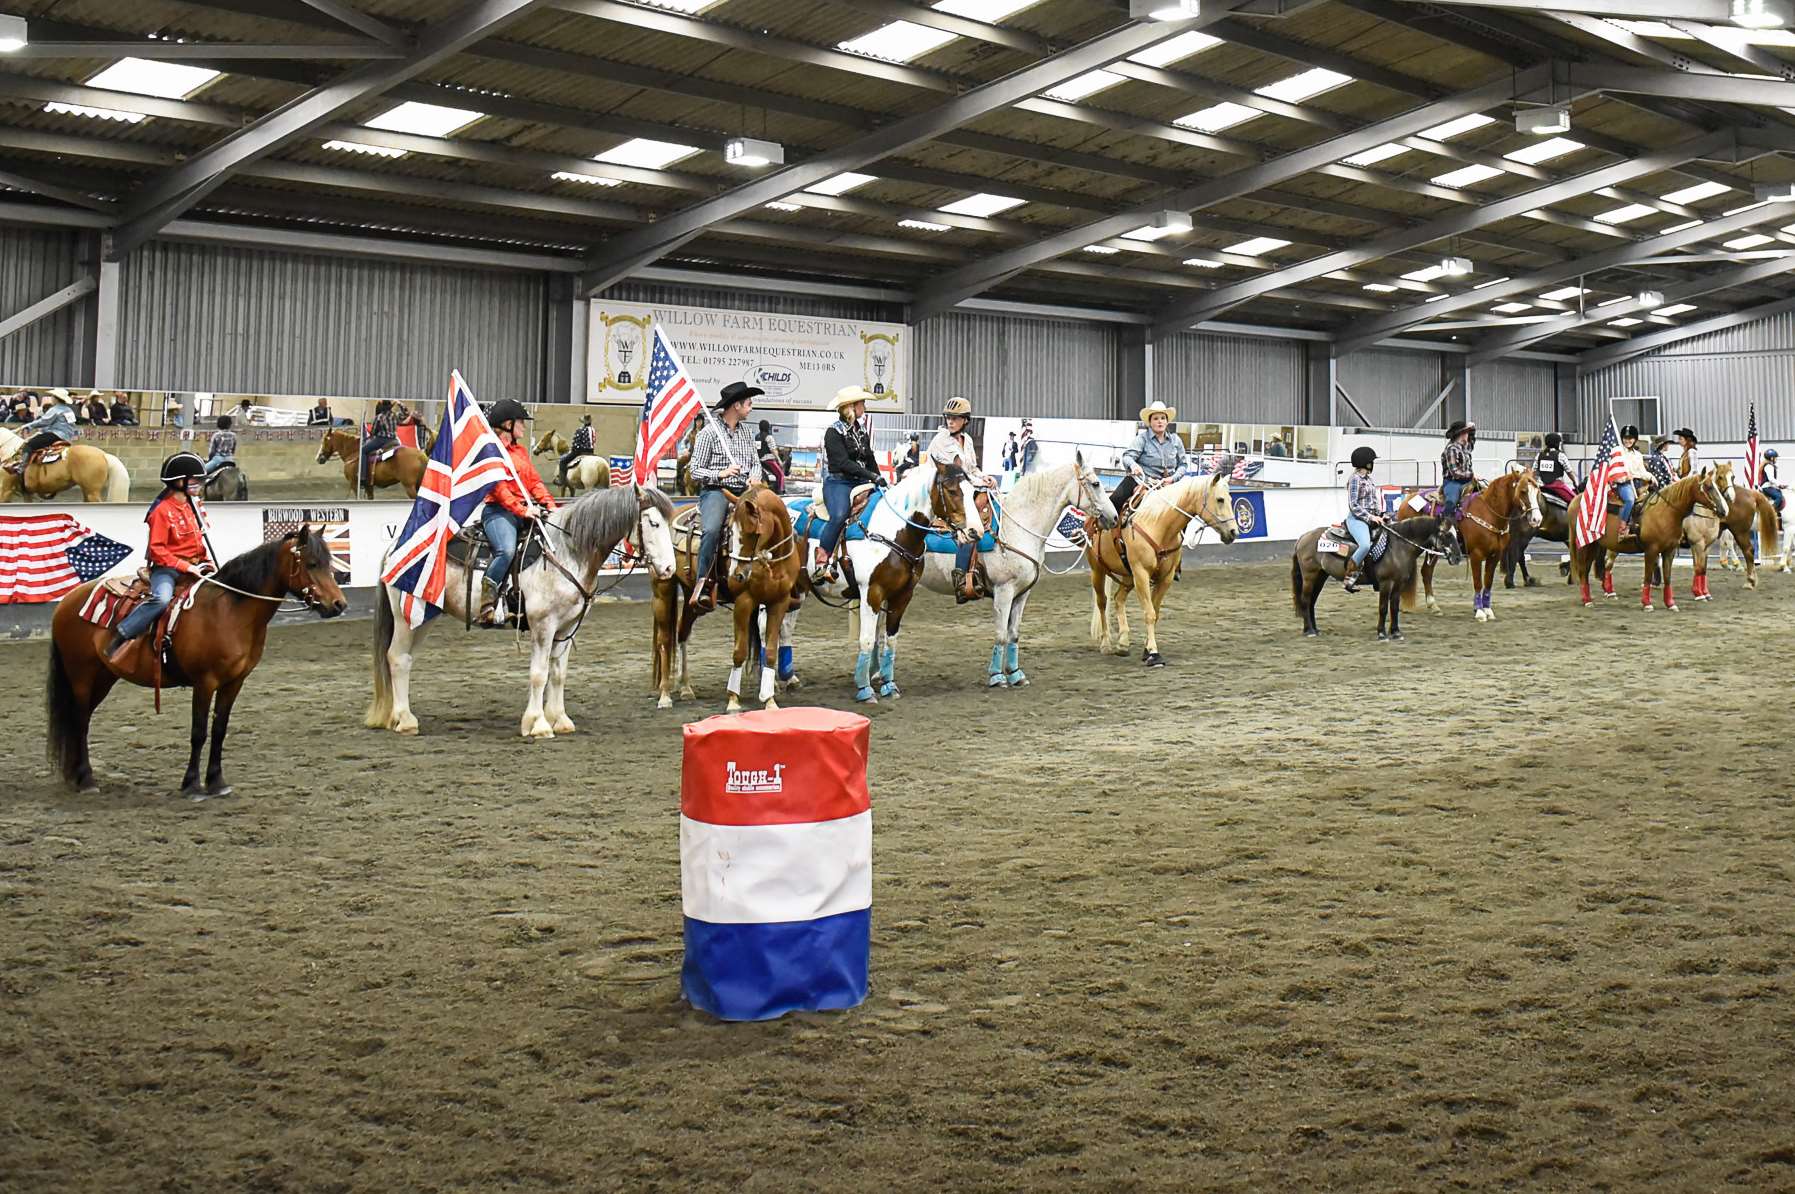 More than 60 competitors from across the country took part in the show